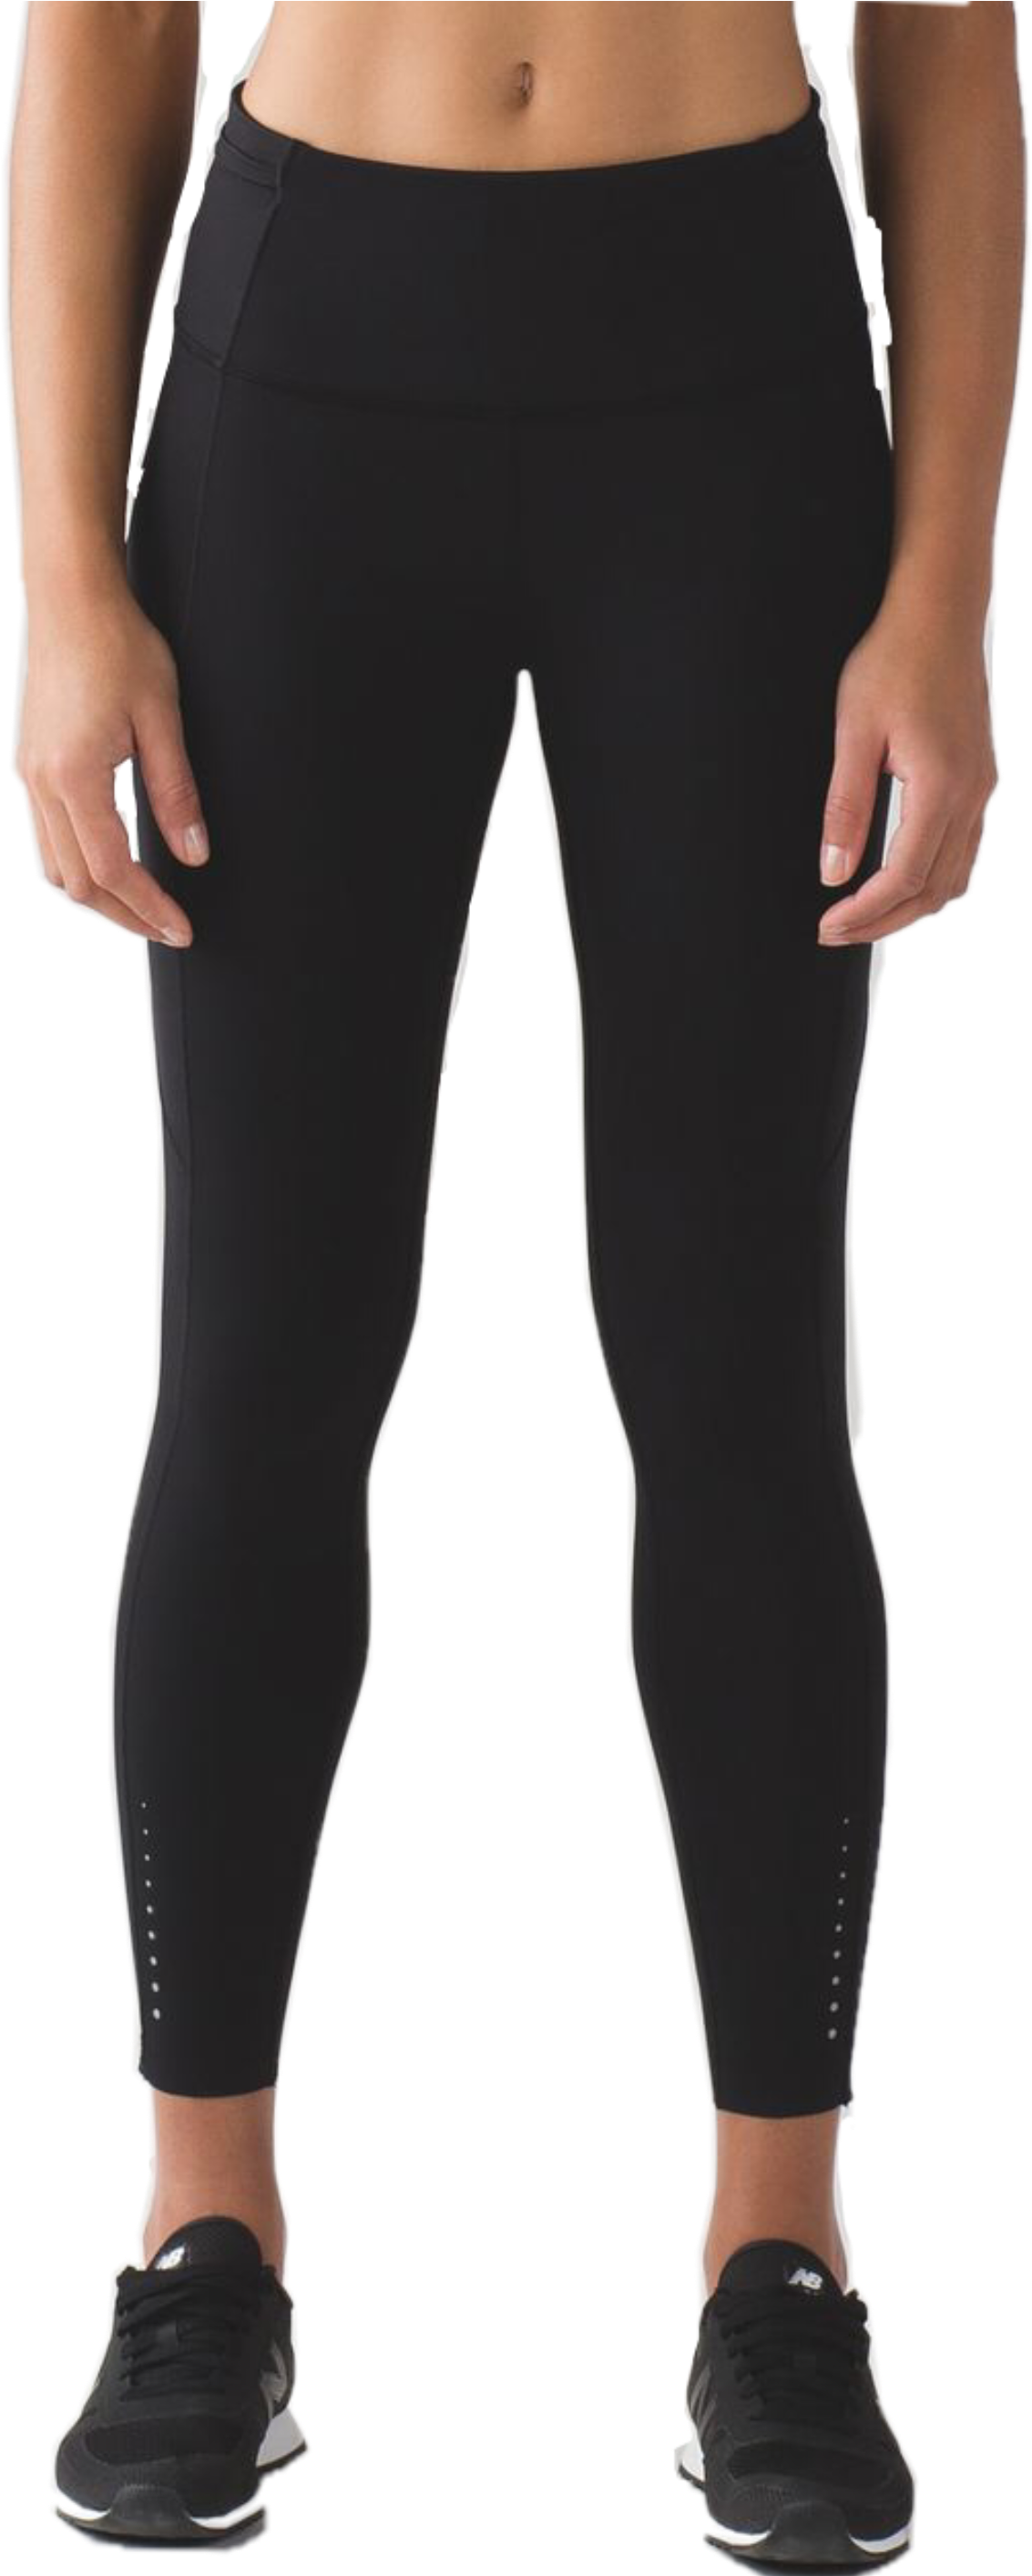 Free Leggings PNG Images with Transparent Backgrounds - FastPNG.com